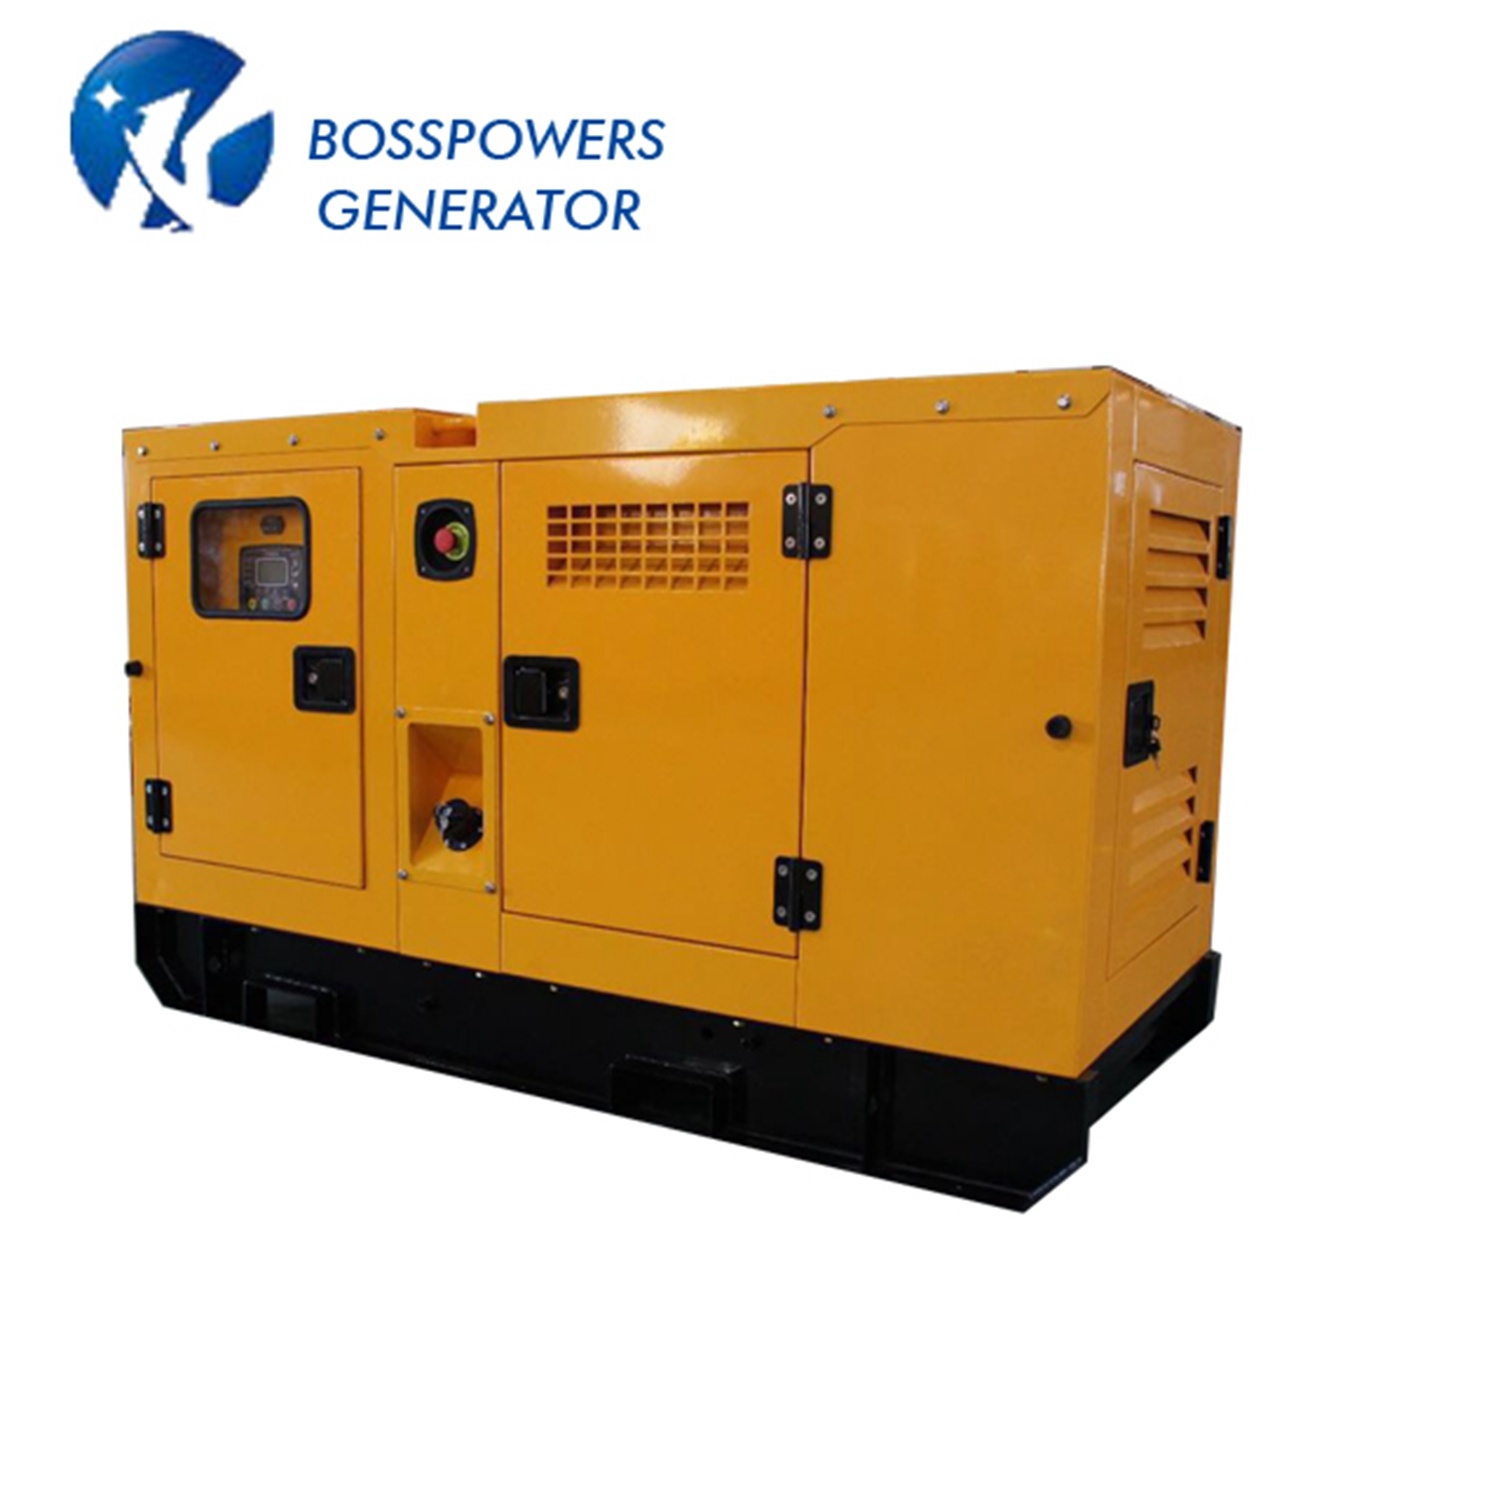 New Design Good Cost Effective China Ricardo Diesel Generator by ISO Certified Generator